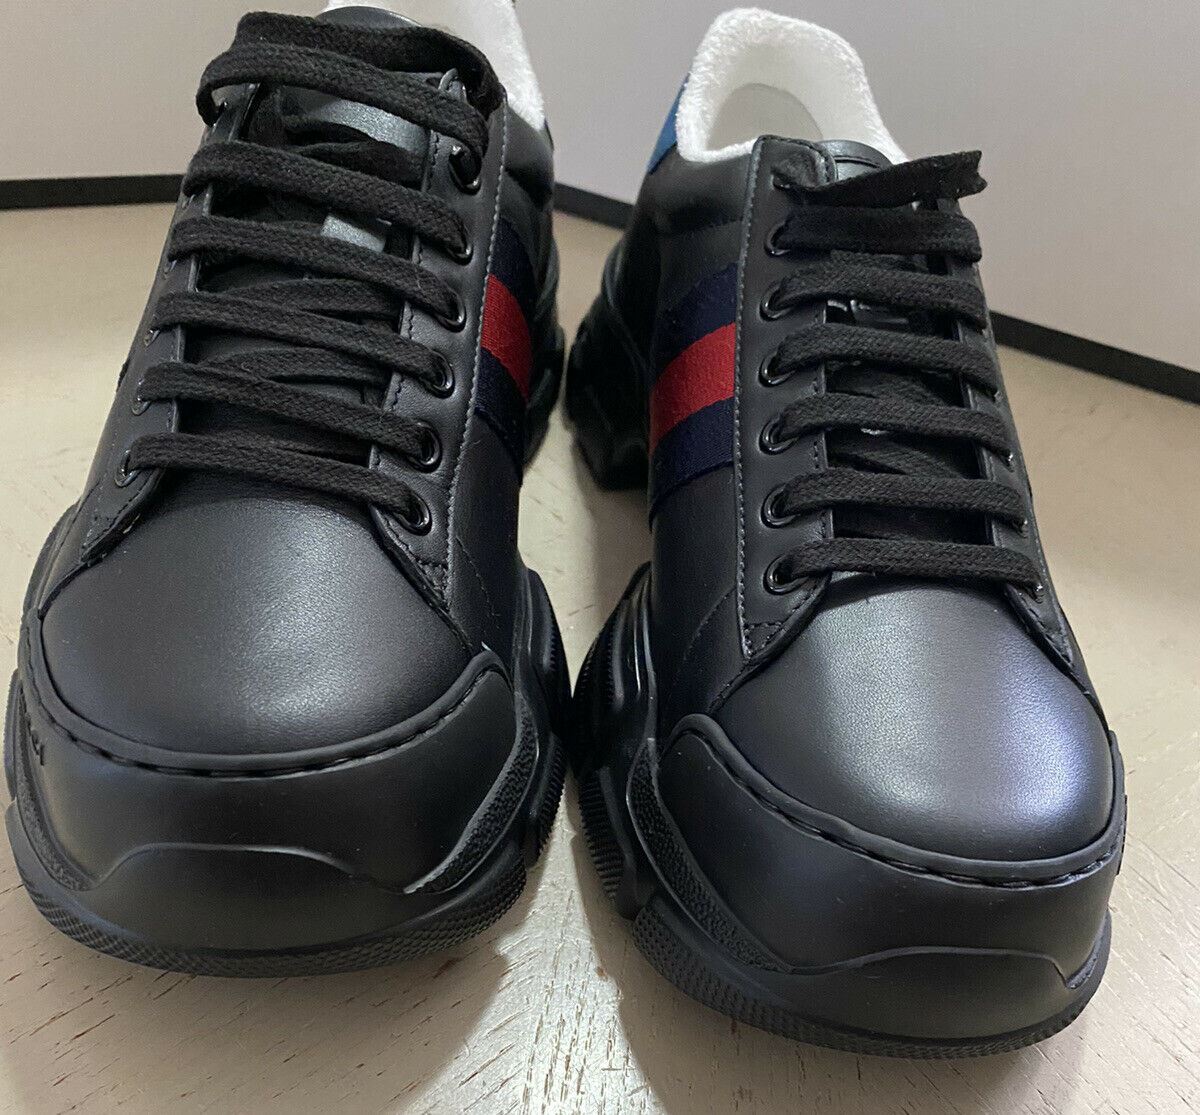 New Gucci Men’s Leather Sneakers Shoes Black 8 US ( 7 UK ) 624701